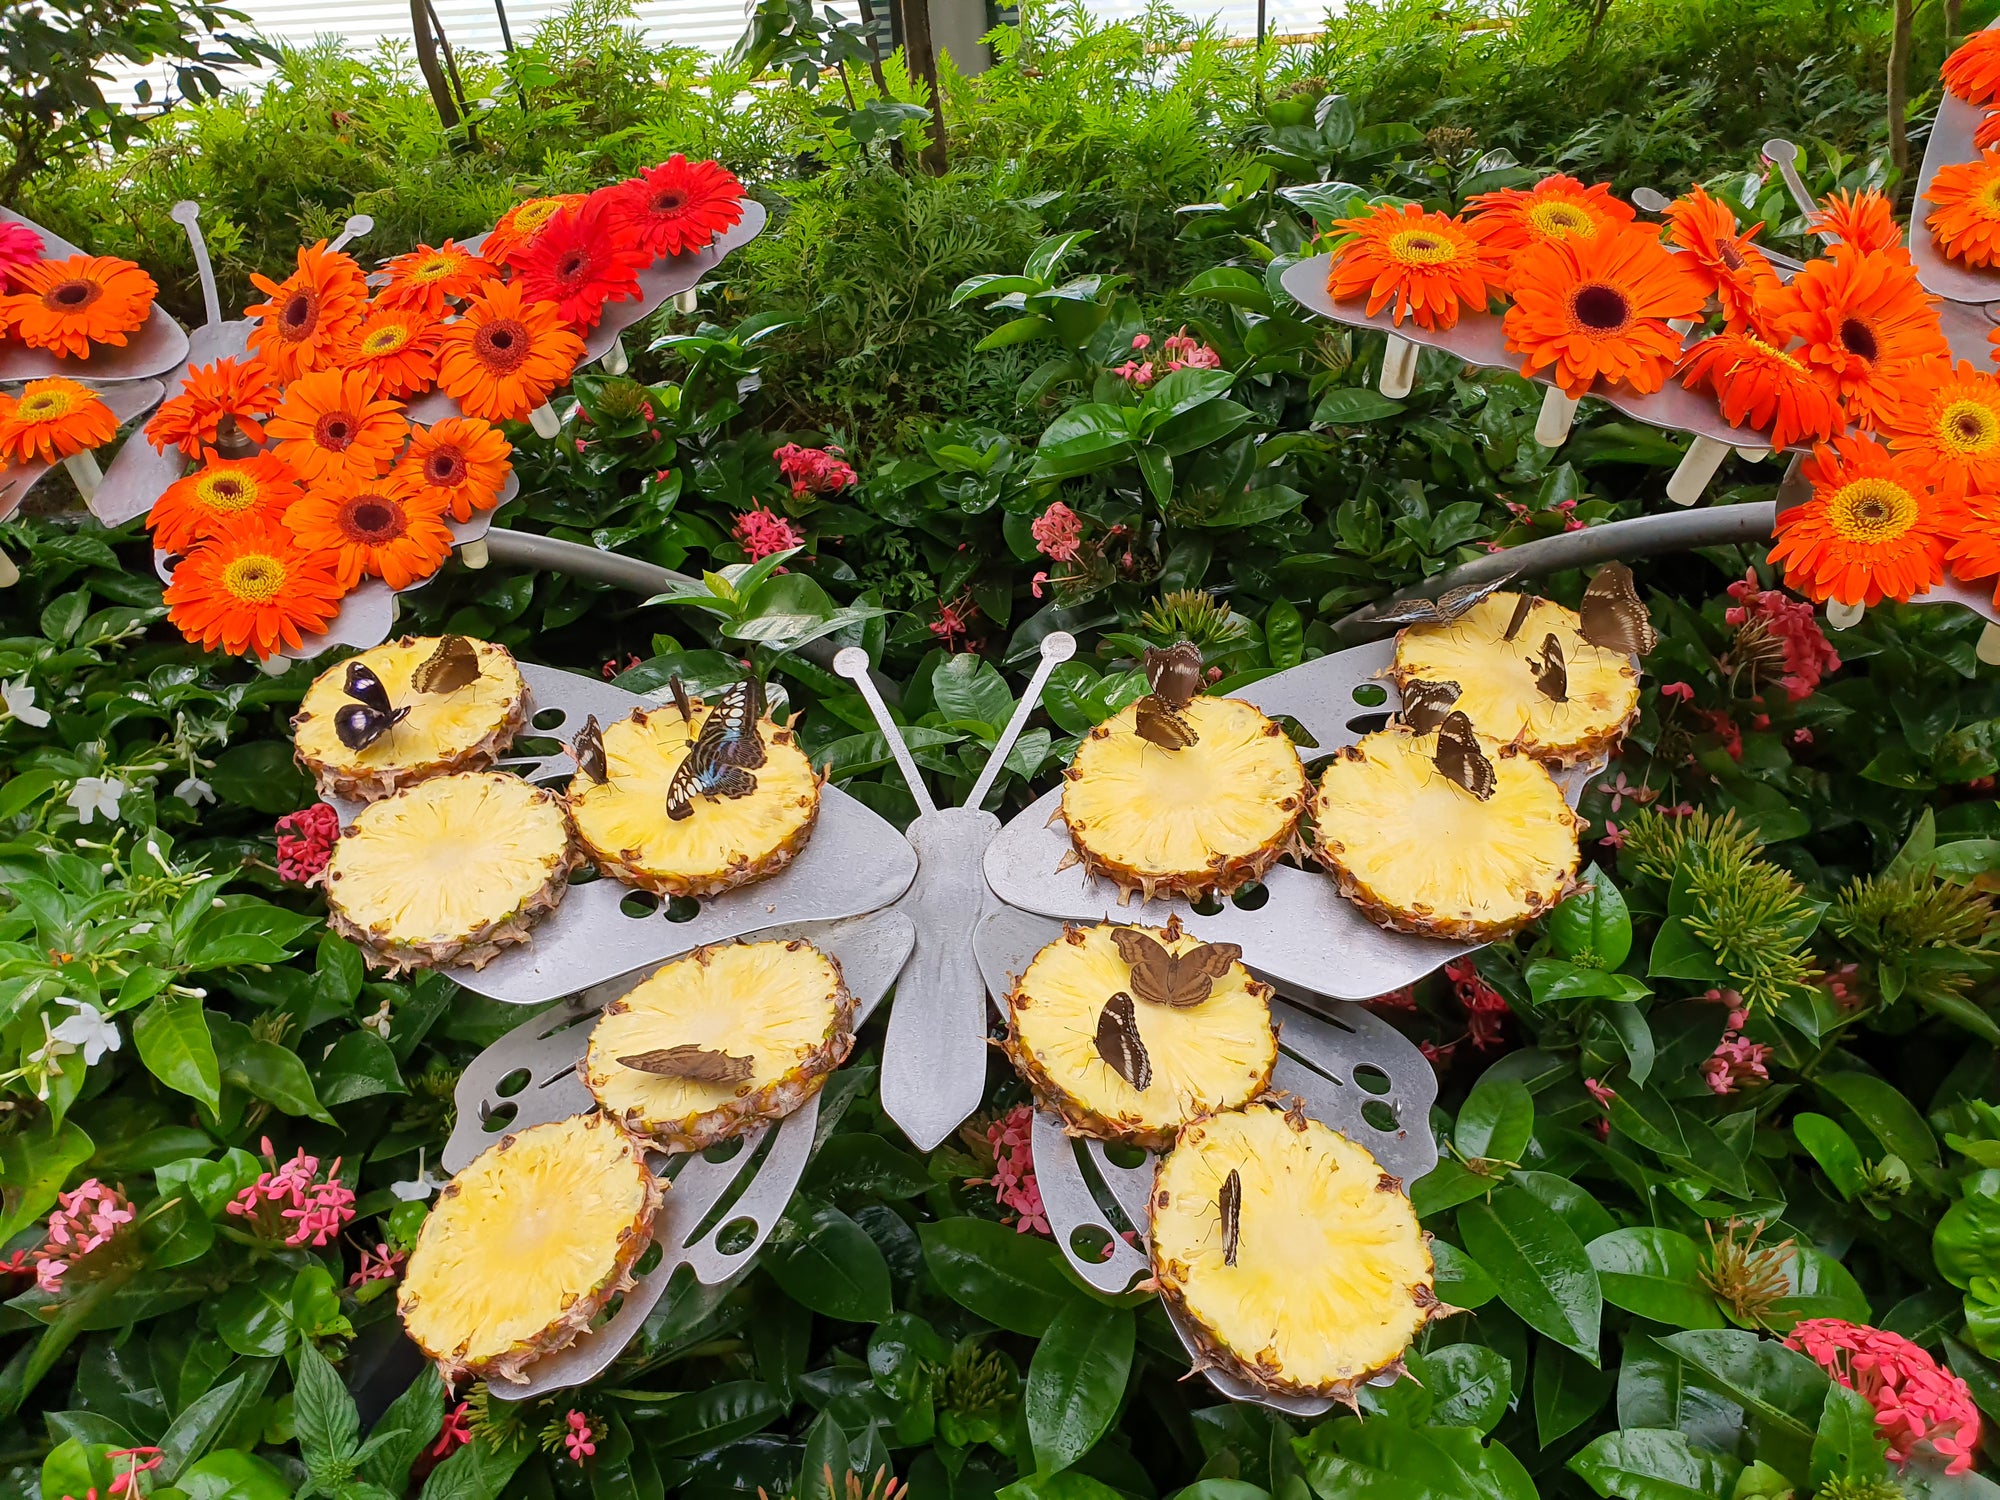 Butterflies on pineapple slices among tropical red flowers at the Changi Airport in Singapore